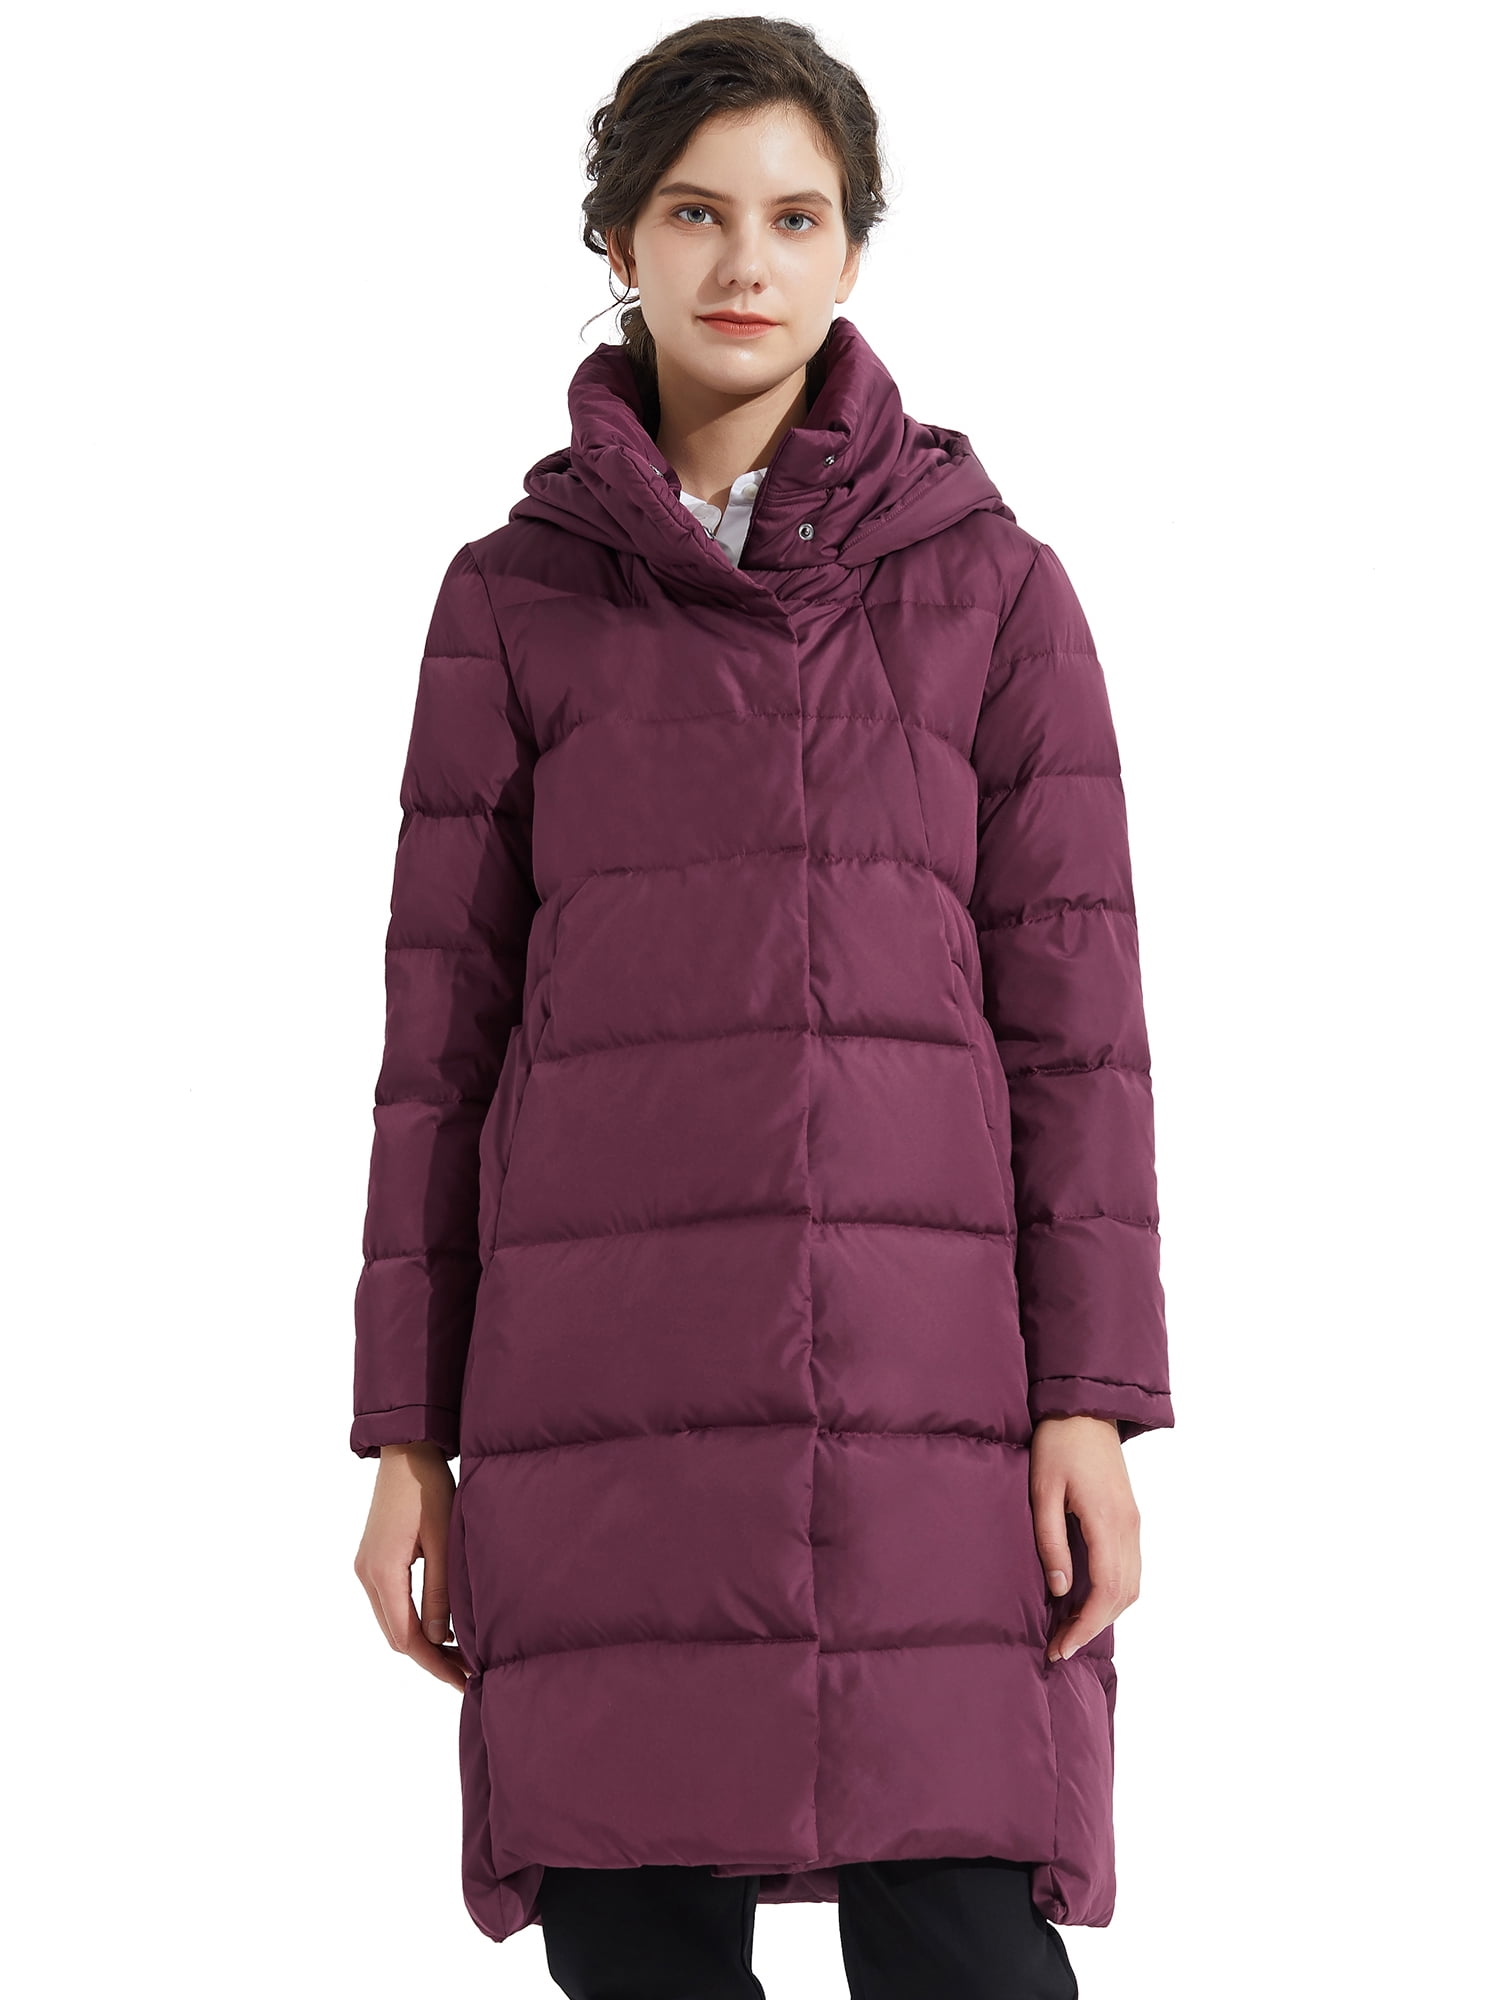 GenericWomen Winter Mid Long Solid Color Hooded Fake Two Pieces Down Jacket Coat Navy Blue L